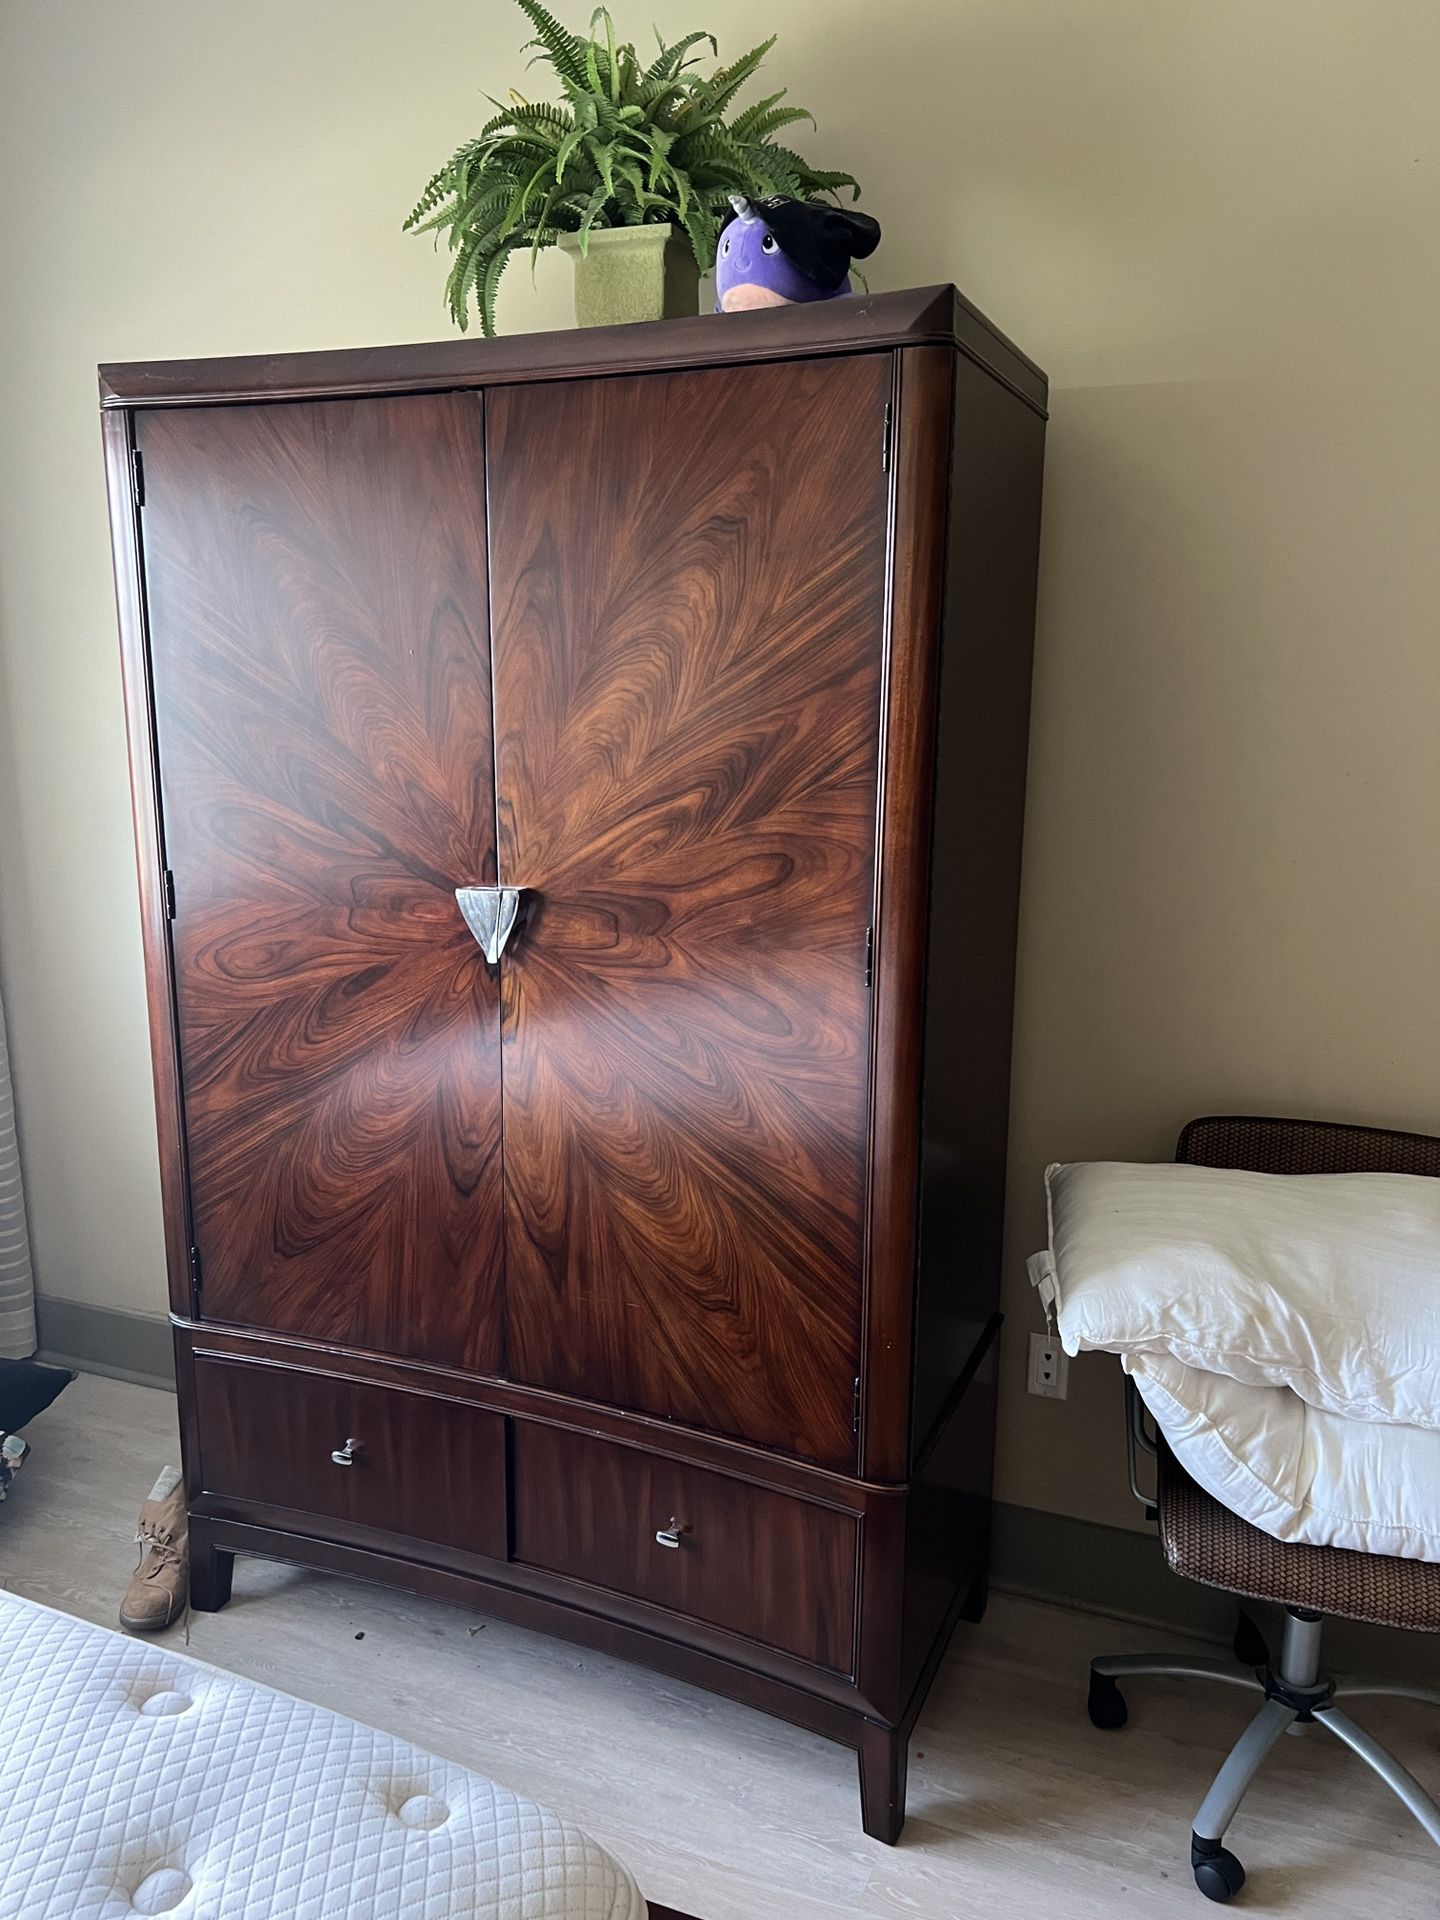 Large Armoire - 80 X 22.5 X 50